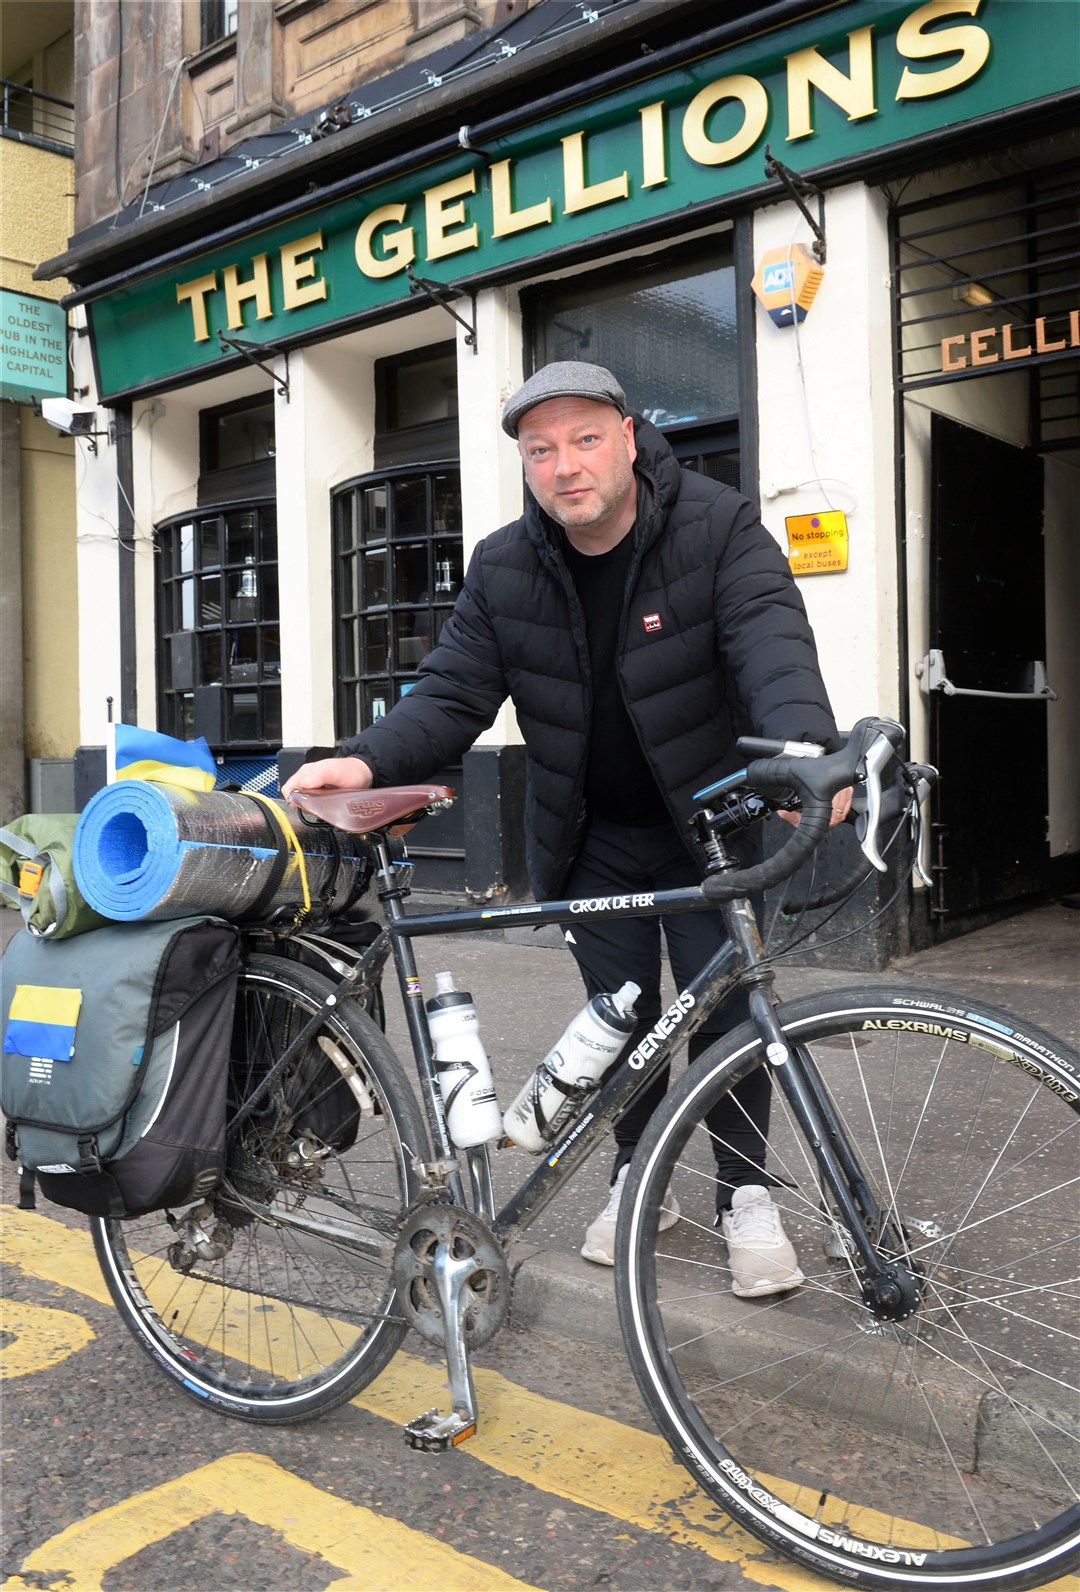 Alasdair Fraser before he set off for his Gdansk to The Gellions fundraising cycle ride for Urkraine.Picture: Gary Anthony